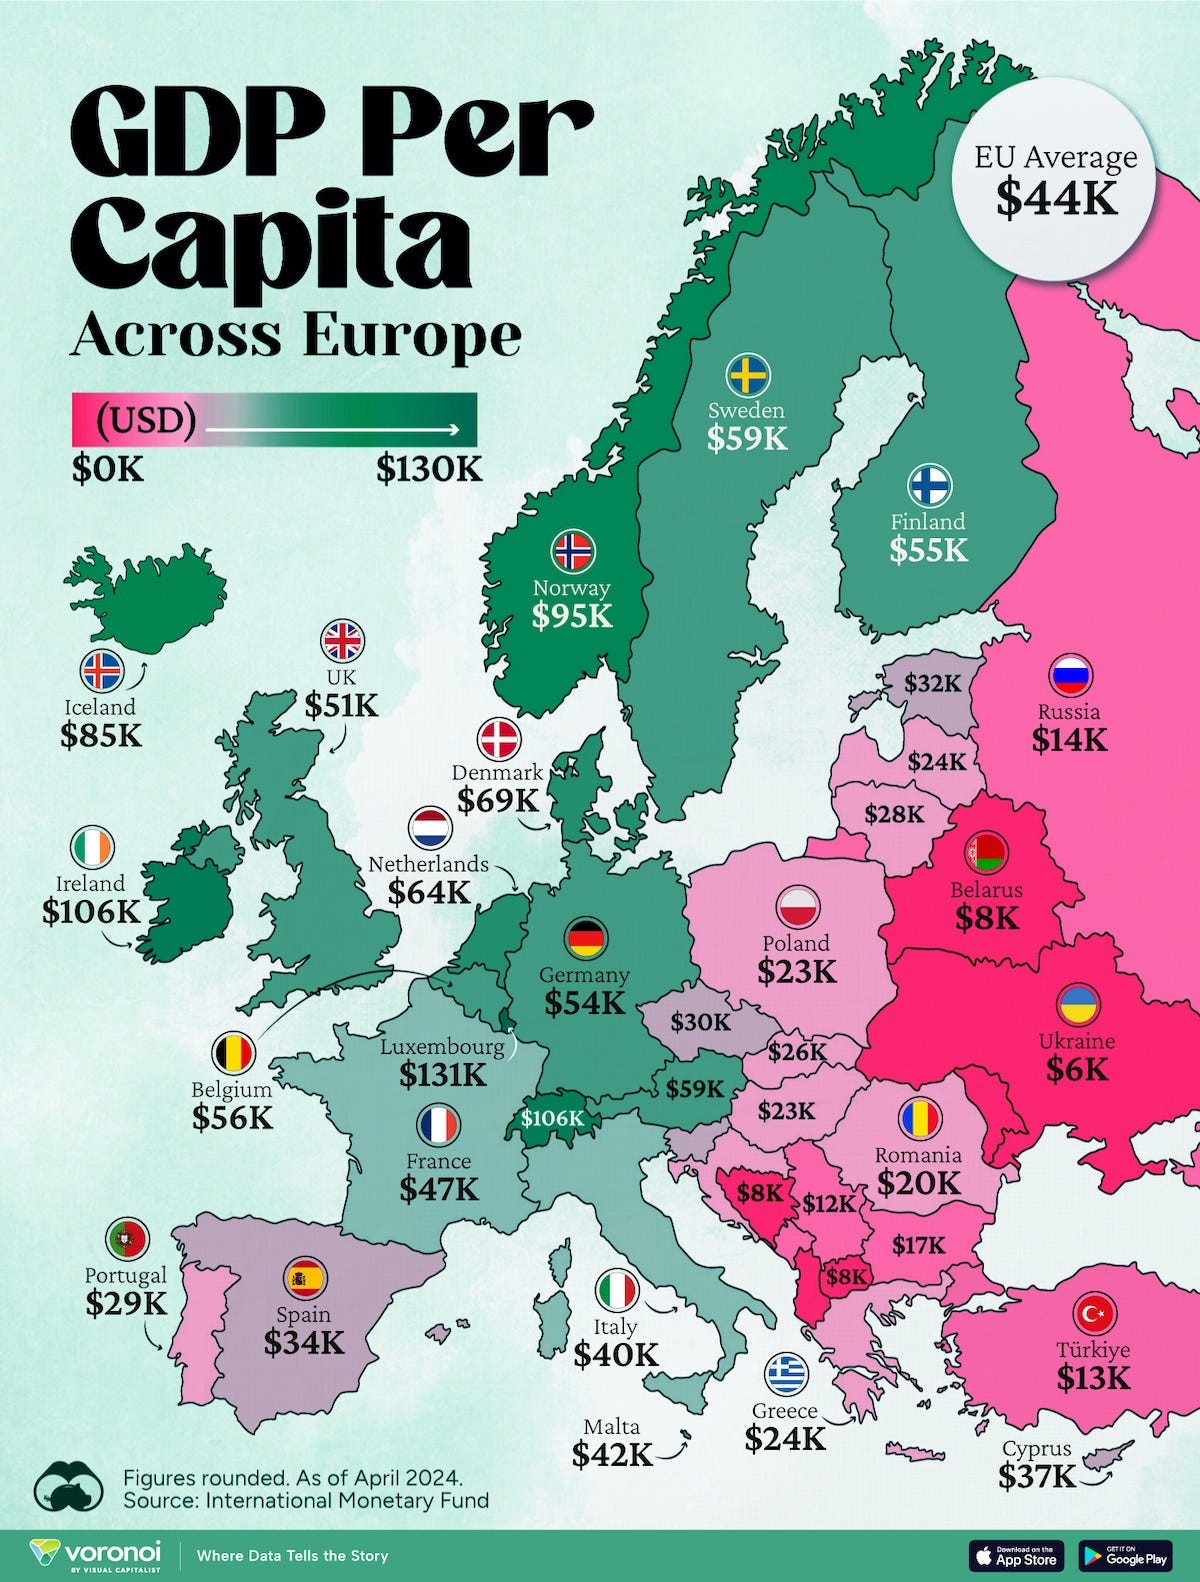 A map of GDP per capita levels for 44 European countries.